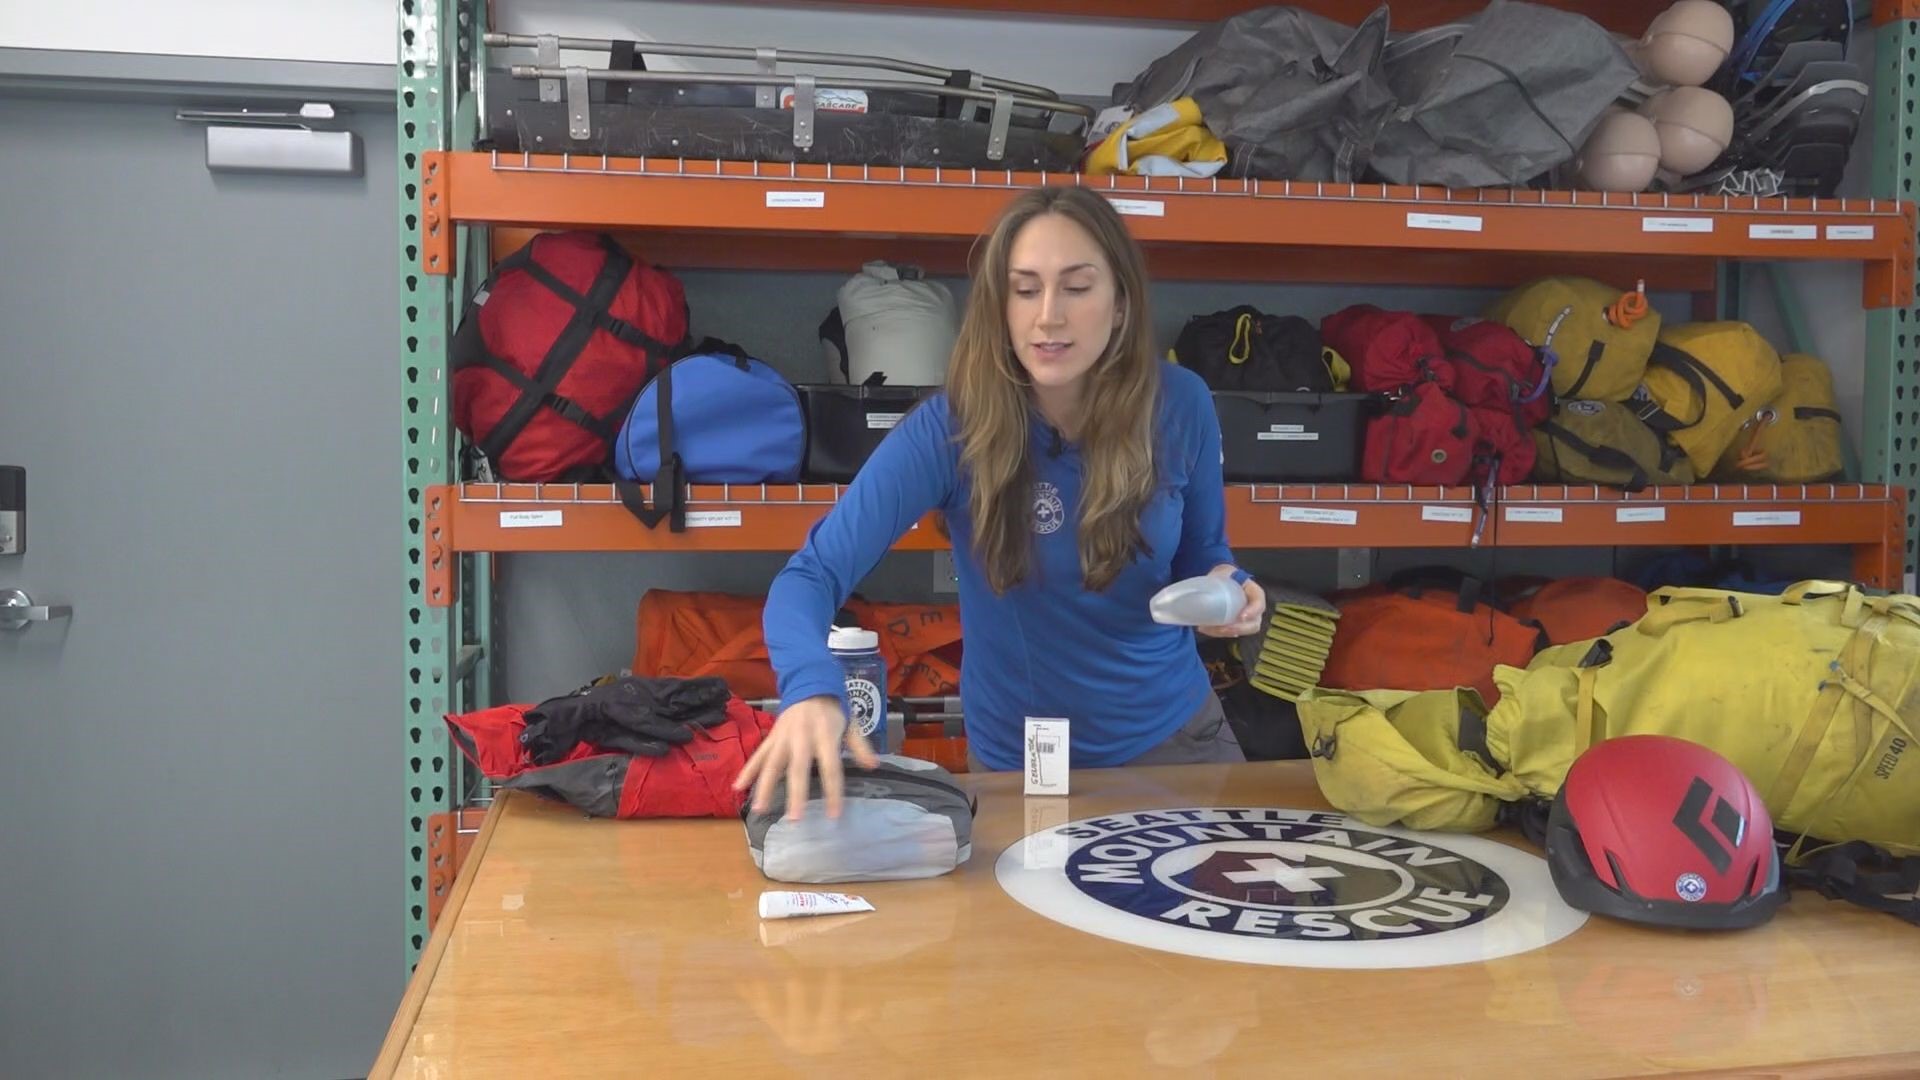 Seattle Mountain Rescue discusses 10 essentials to pack when hiking.